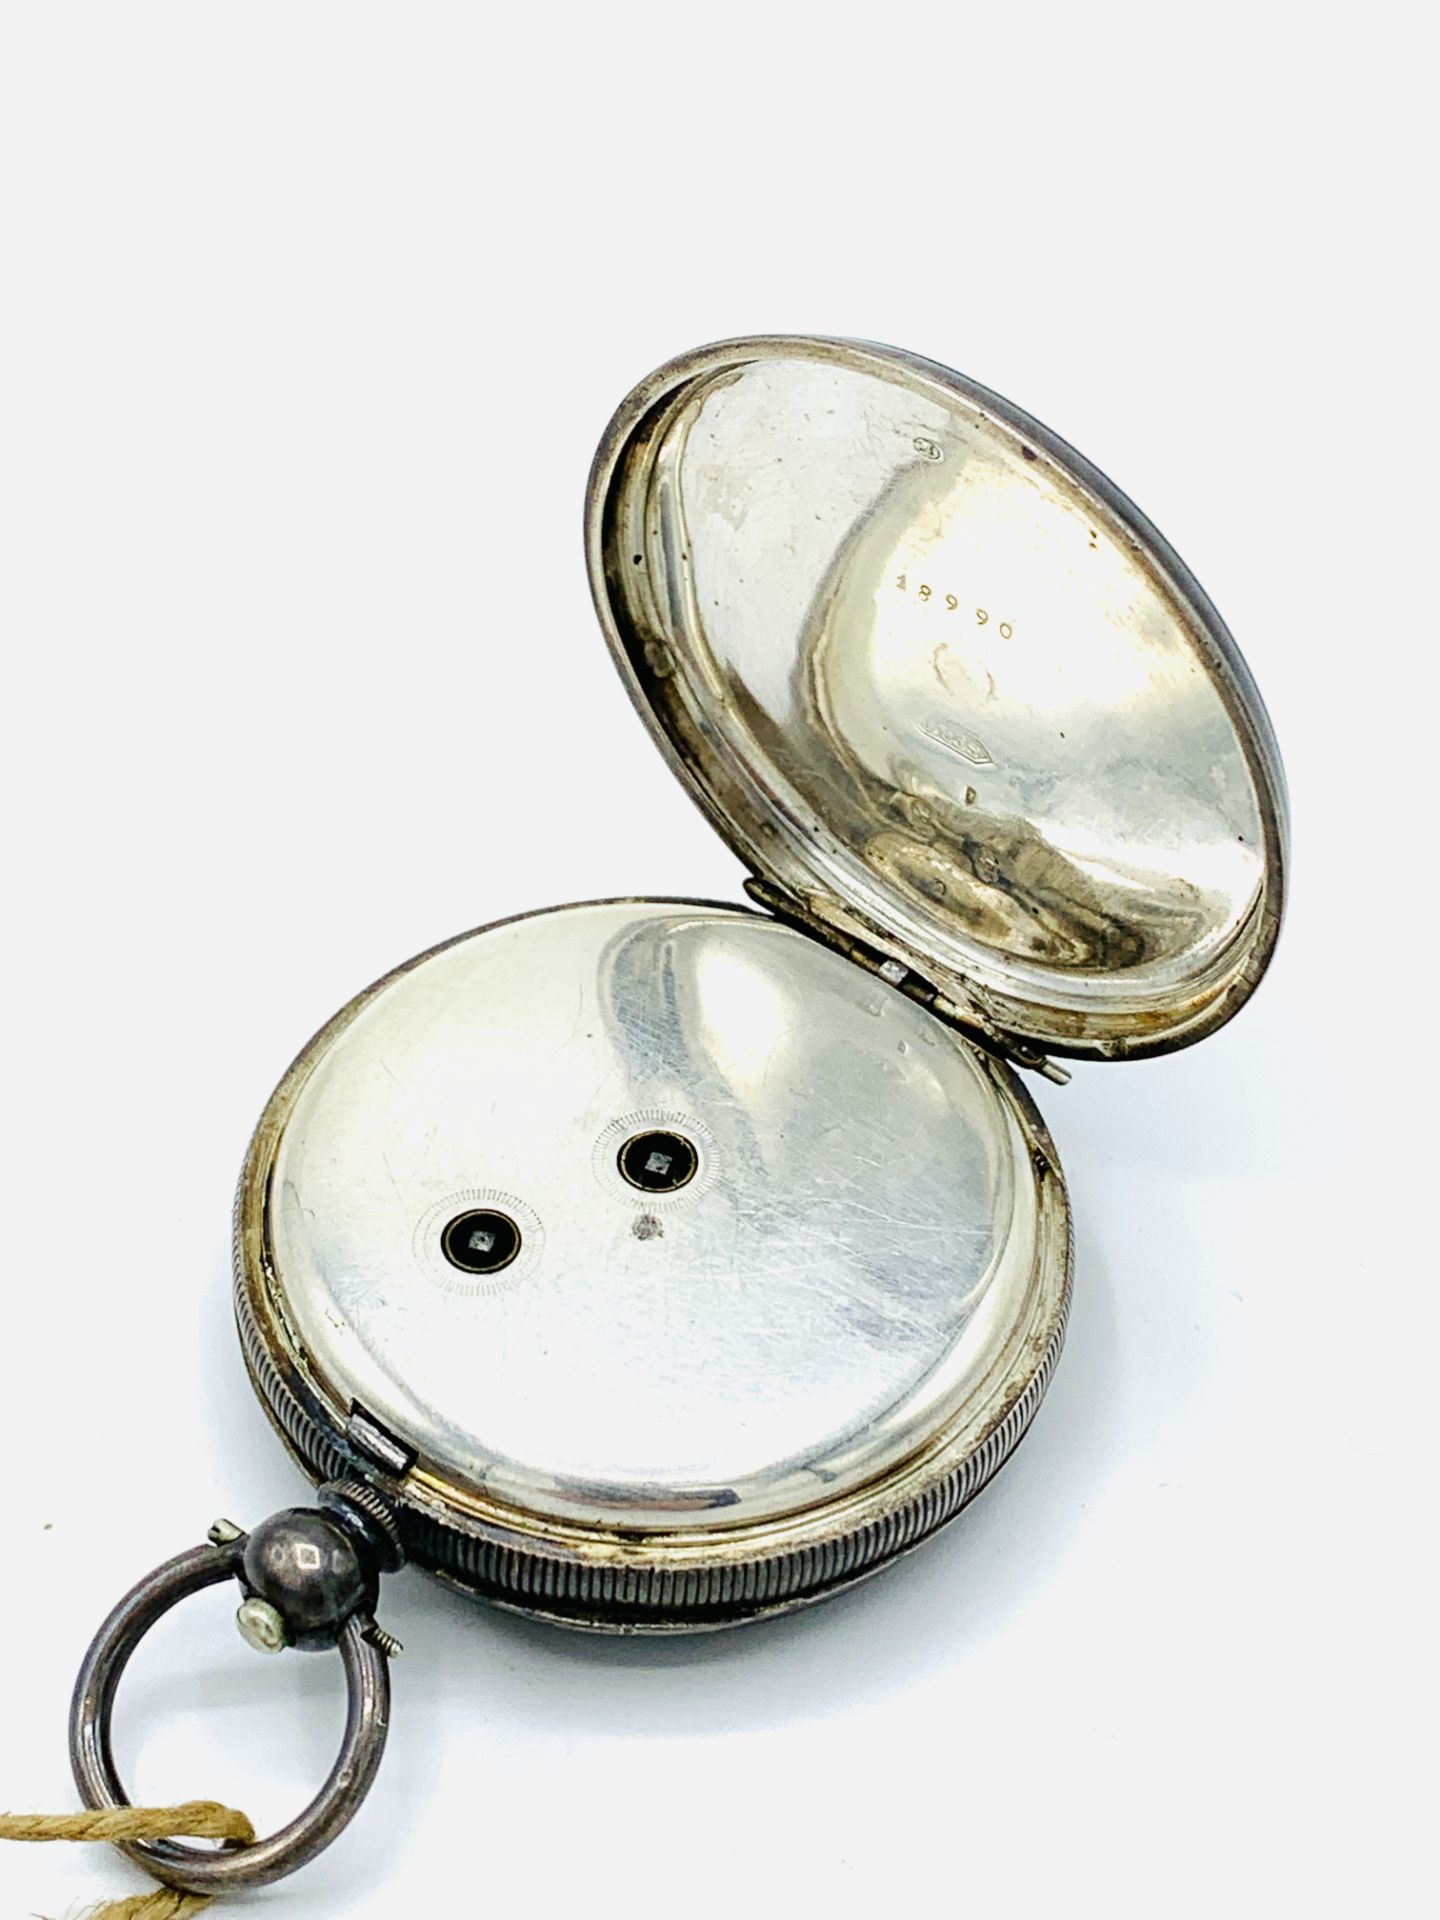 Silver cased pocket watch by A G Masgall, The Ideal, Middlesbrough - Image 3 of 5